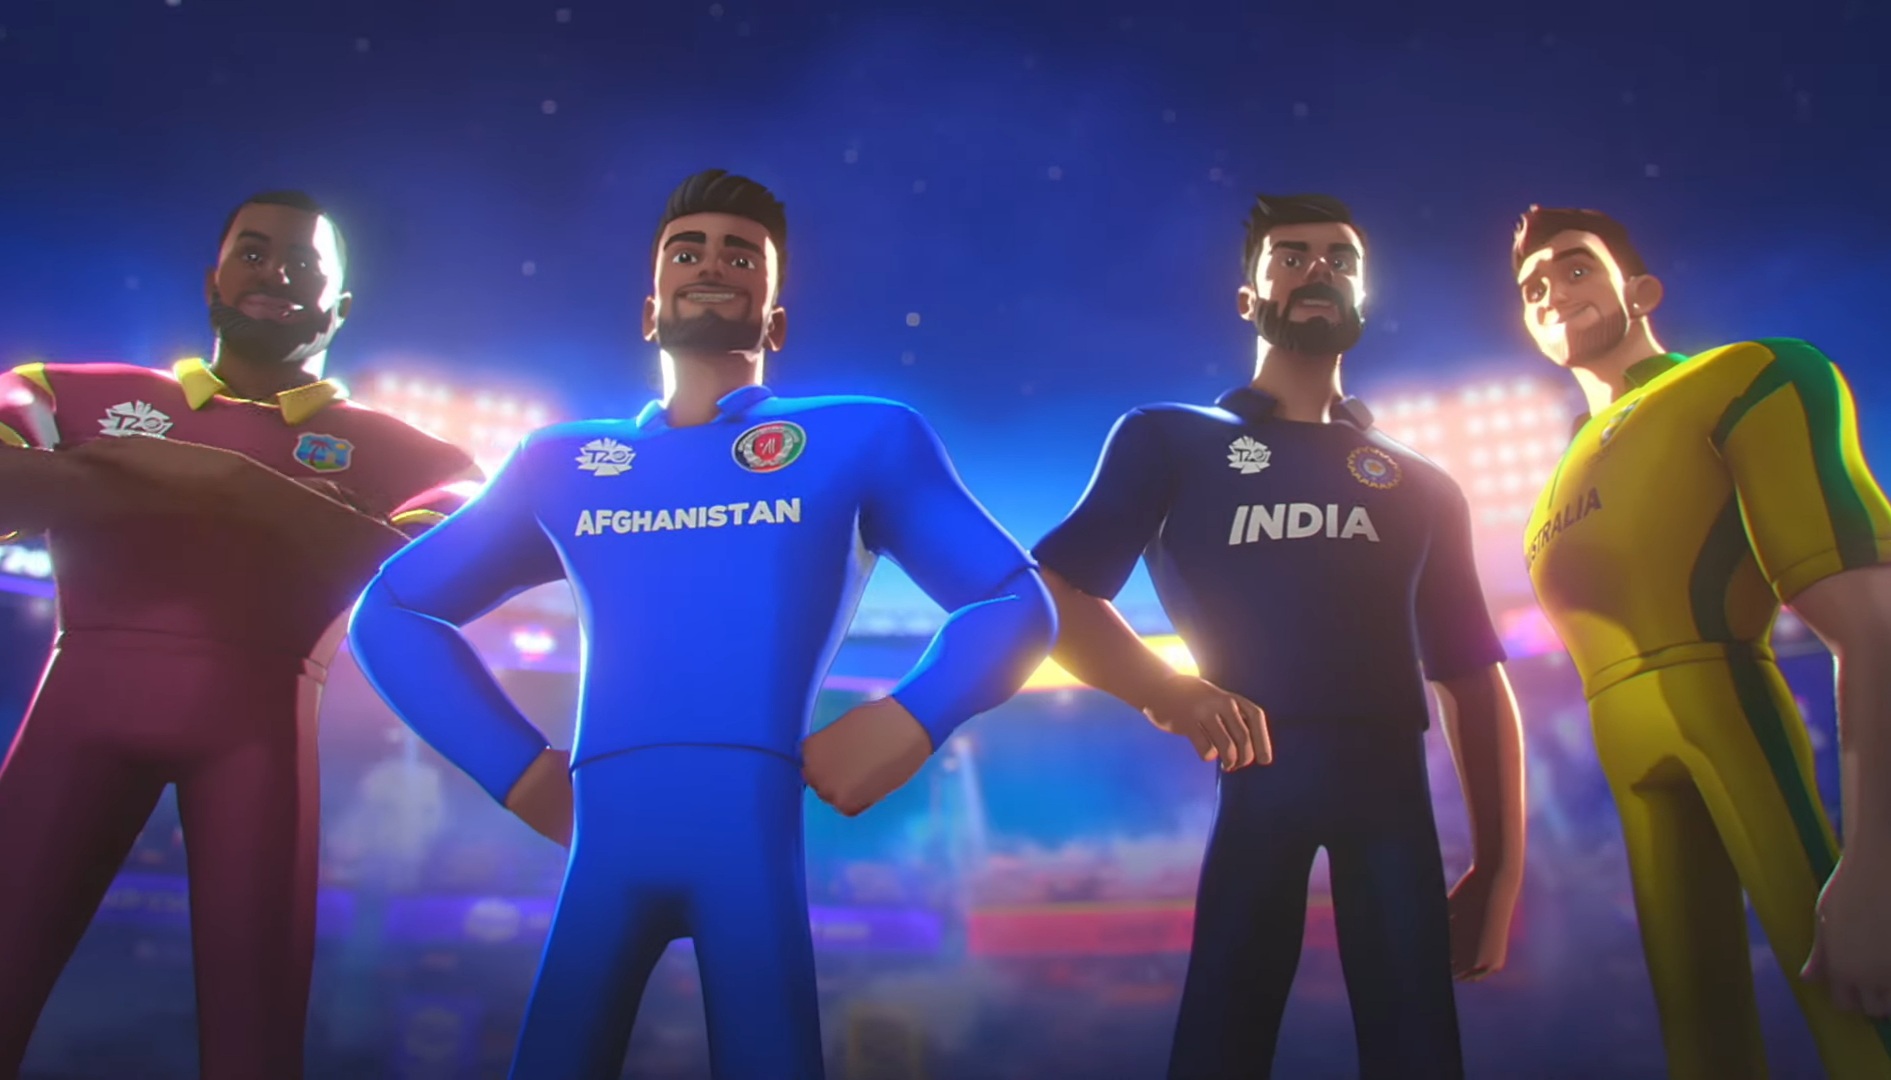 Icc Launches 2021 T20 World Cup Theme Song